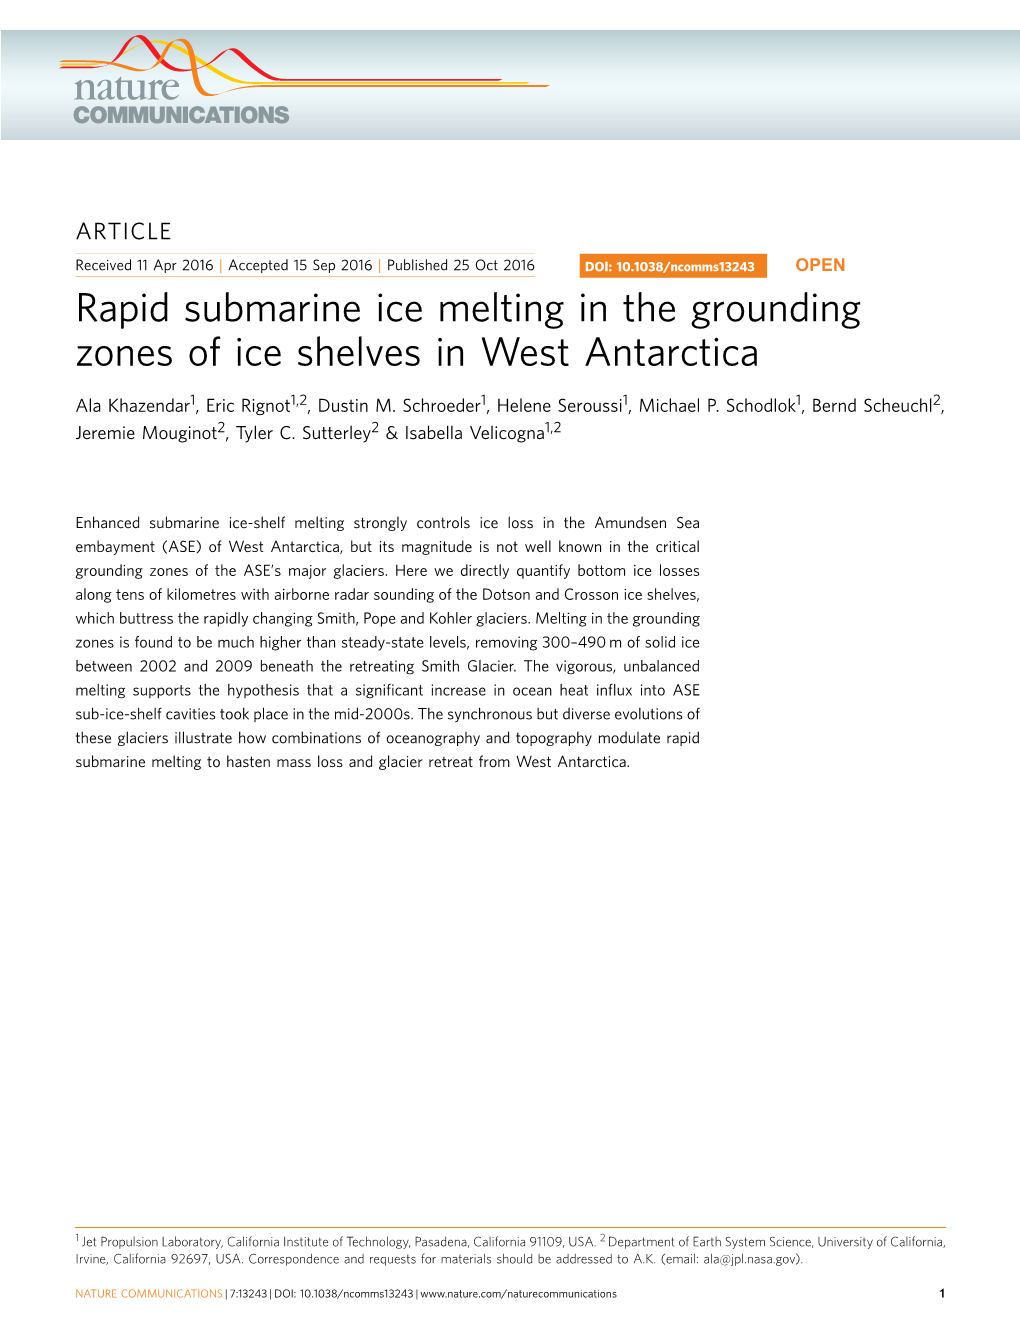 Rapid Submarine Ice Melting in the Grounding Zones of Ice Shelves in West Antarctica